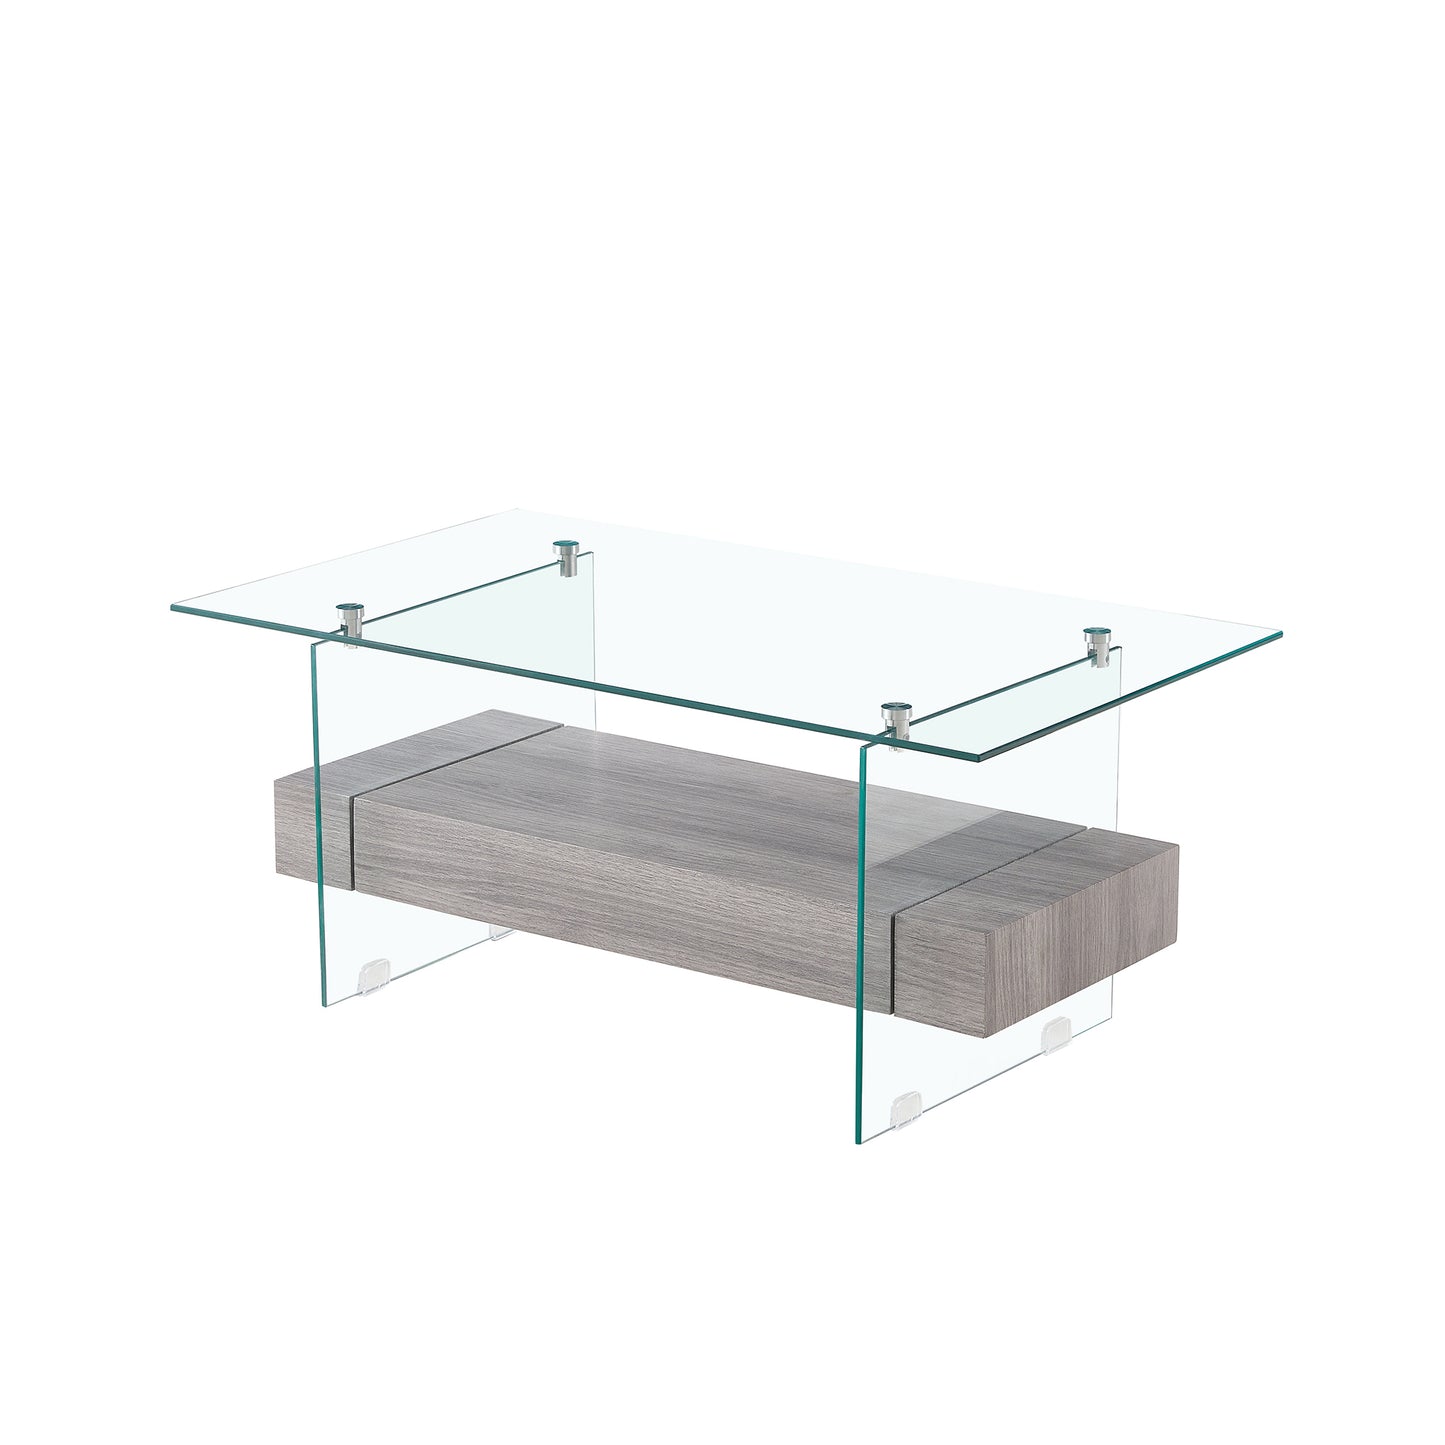 37.8" Tempered Glass & Grey Wash Wood Look Coffee Table with Dual Shelves and Drawer